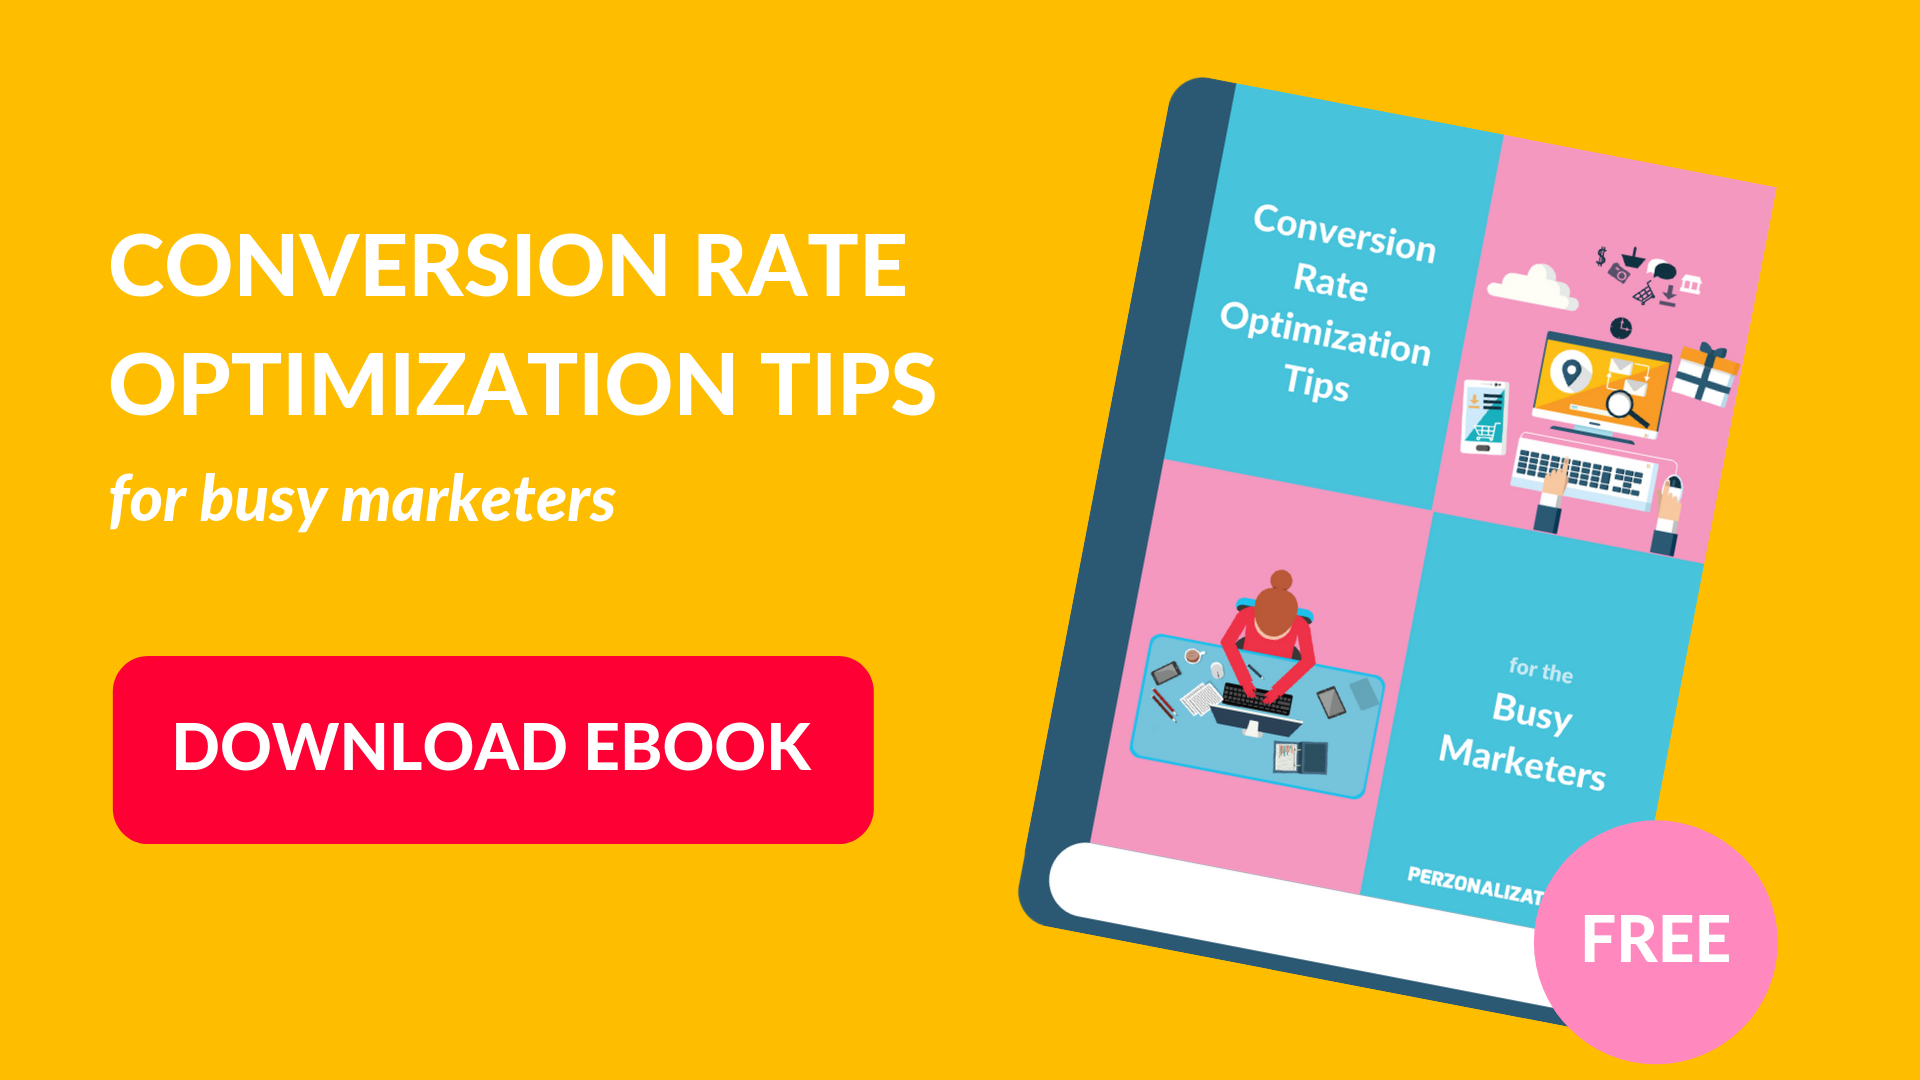 Download free eBook: Conversion rate optimization tips